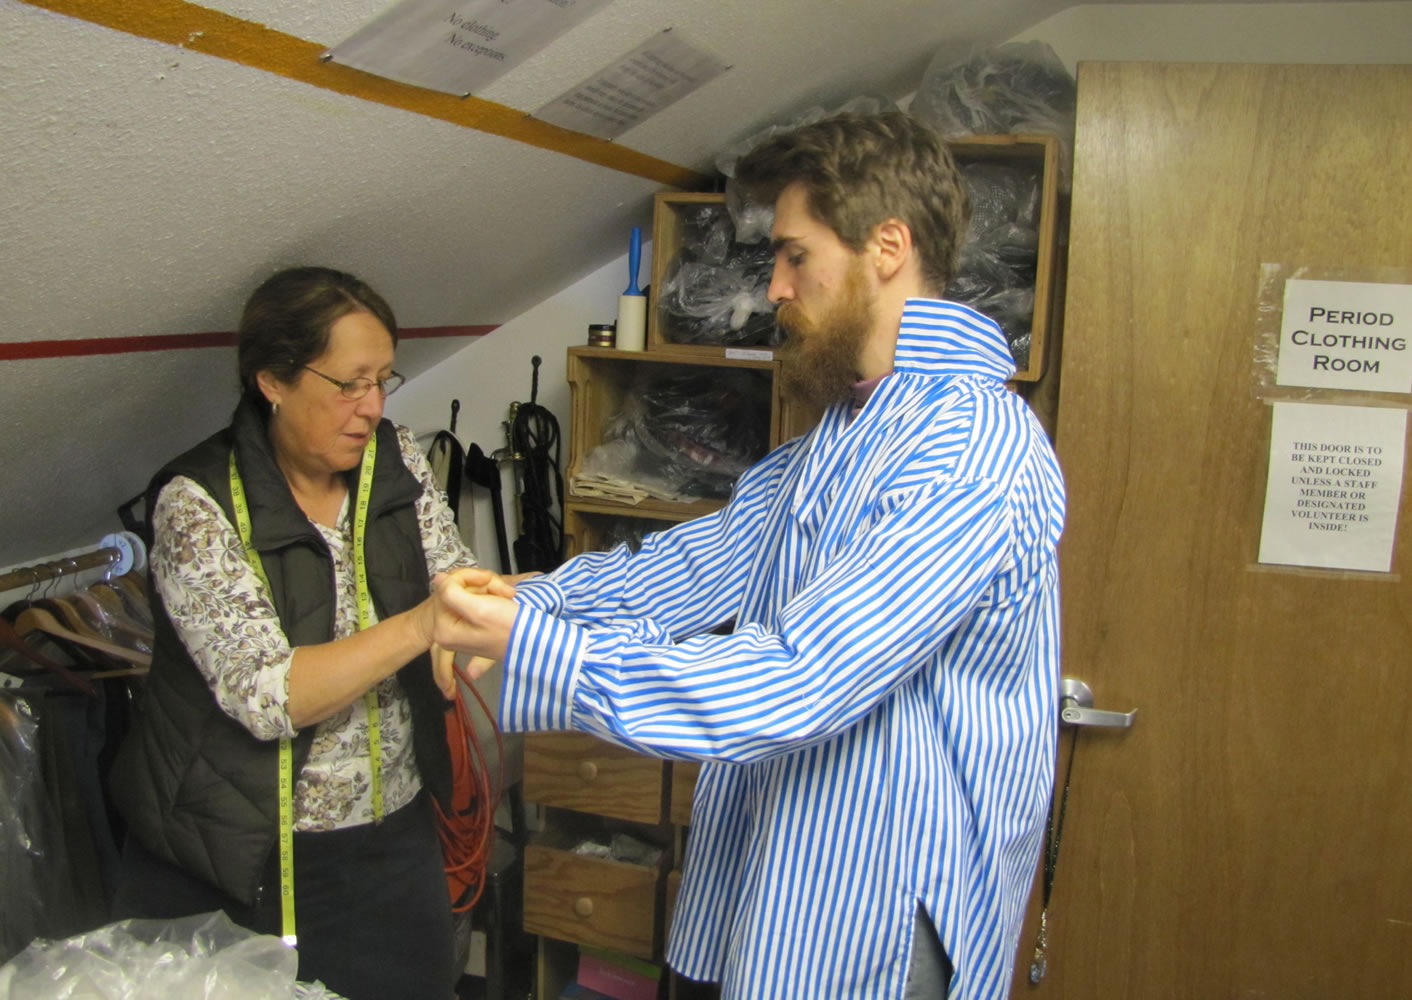 Sheila Dolle checks the fit as re-enactor Ethan Hardy tries on a shirt.